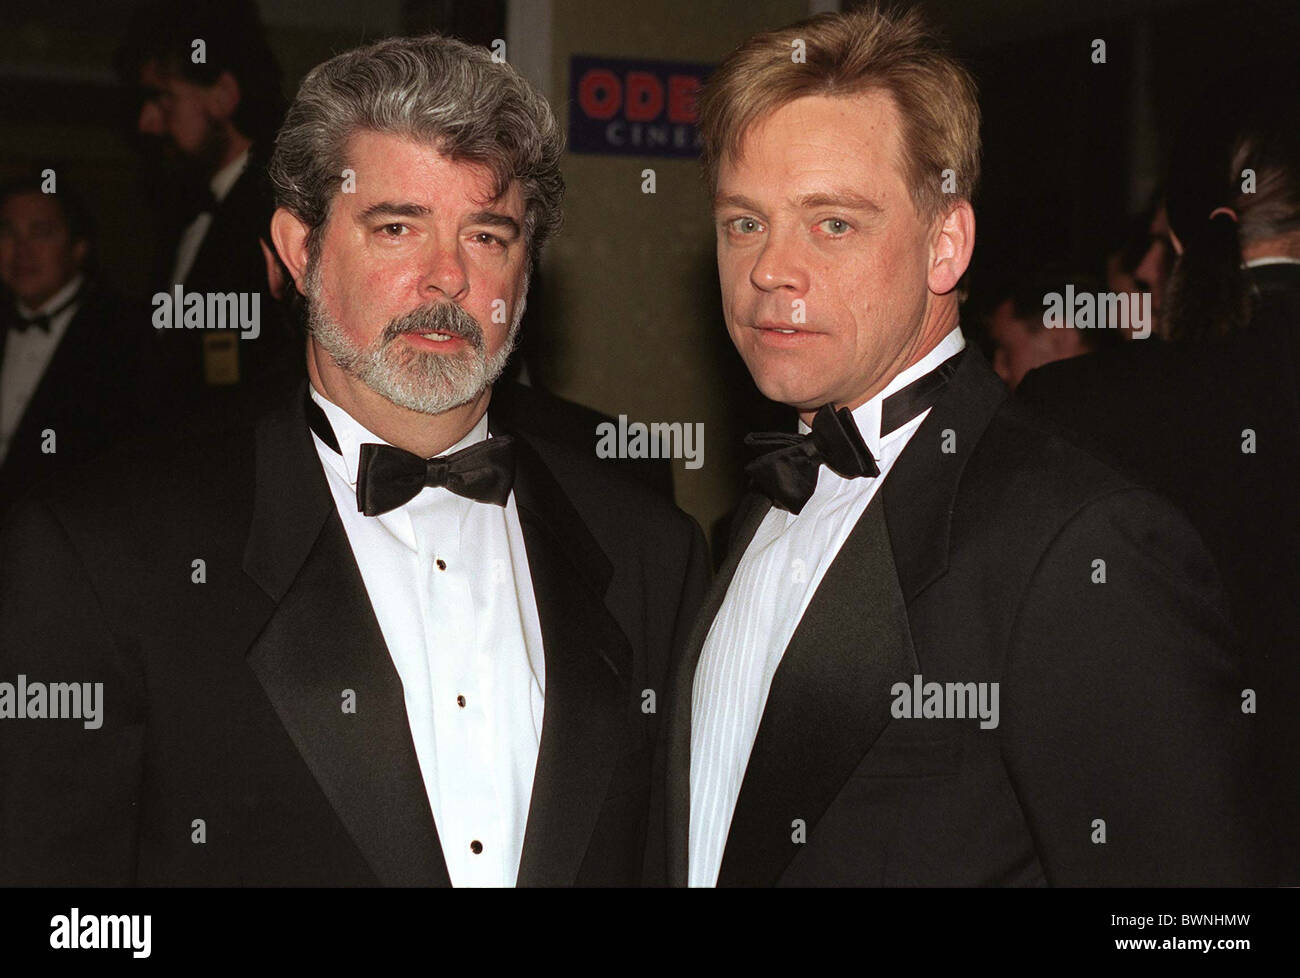 GEORGE LUCAS ,THE MOVIE CREATOR, [LEFT] AND MARK HAMILL (LUKE SKYWALKER) AT LONDON PREMIERE OF THE FILM 'STAR WARS' Stock Photo